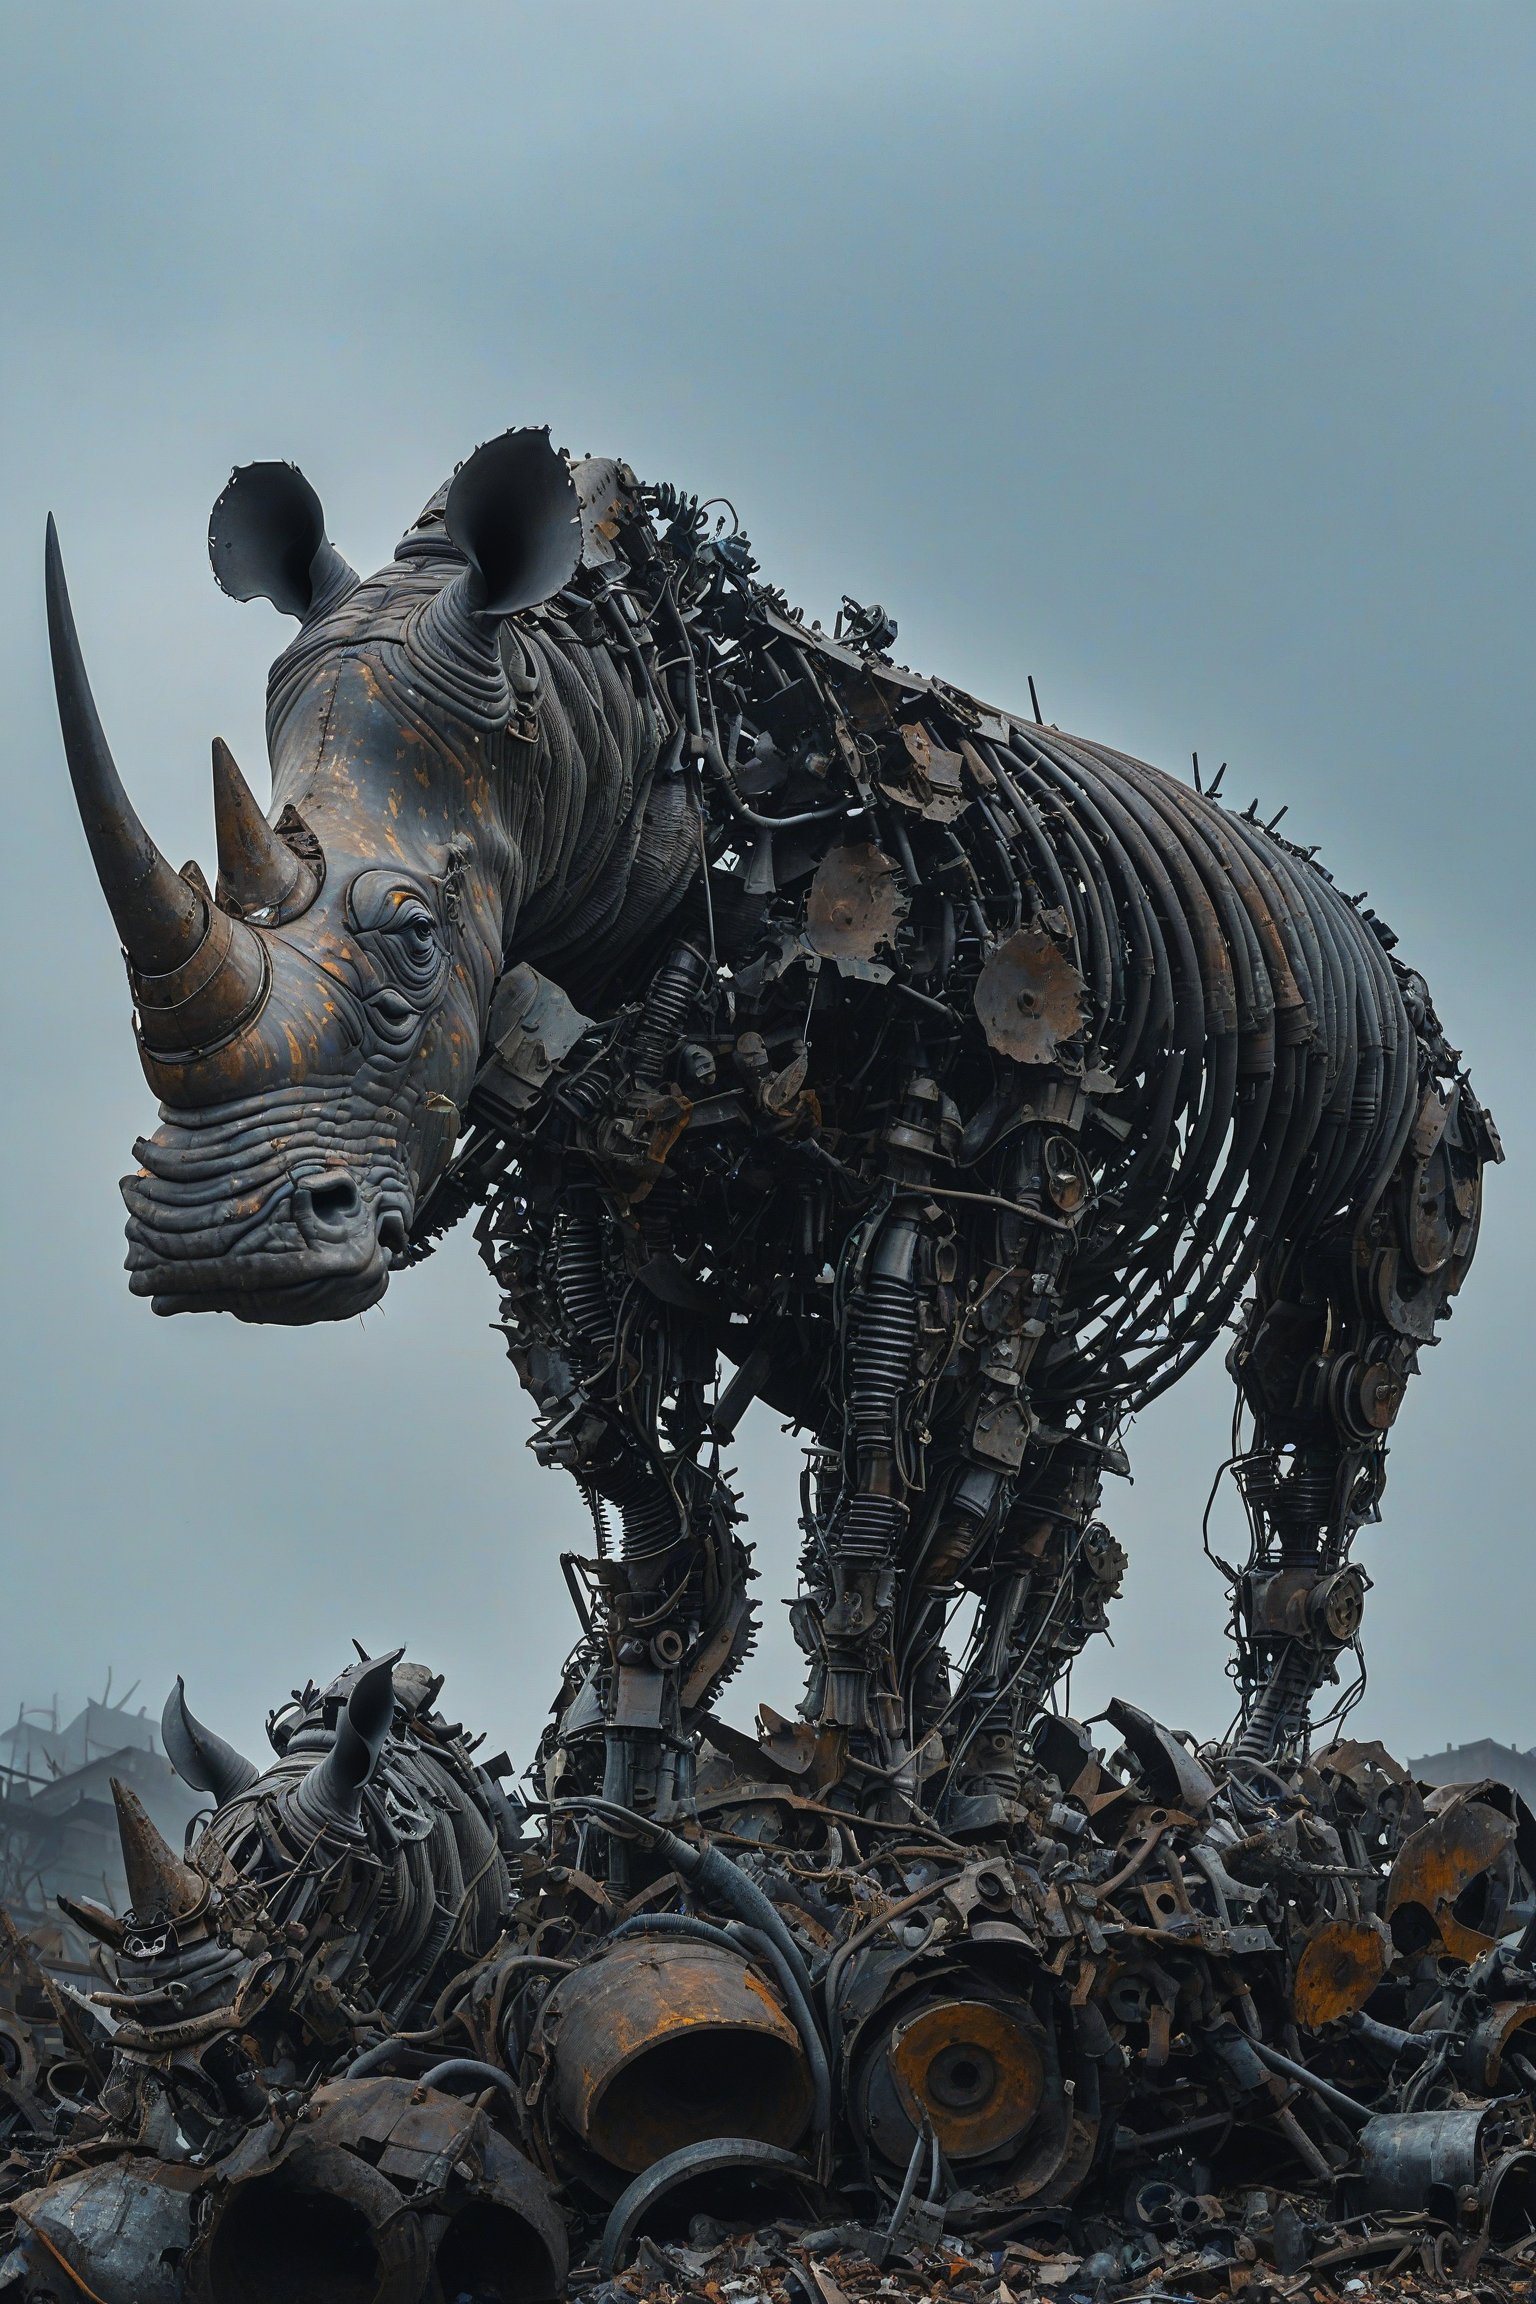 A towering, intricately constructed mechanical rhinoceros standing atop a mound of discarded metal and debris. The rhinoceros appears to be made of various metal parts, wires, and tools, giving it a skeletal and mechanical appearance. The background is overcast, adding a somber and post-apocalyptic feel to the scene.